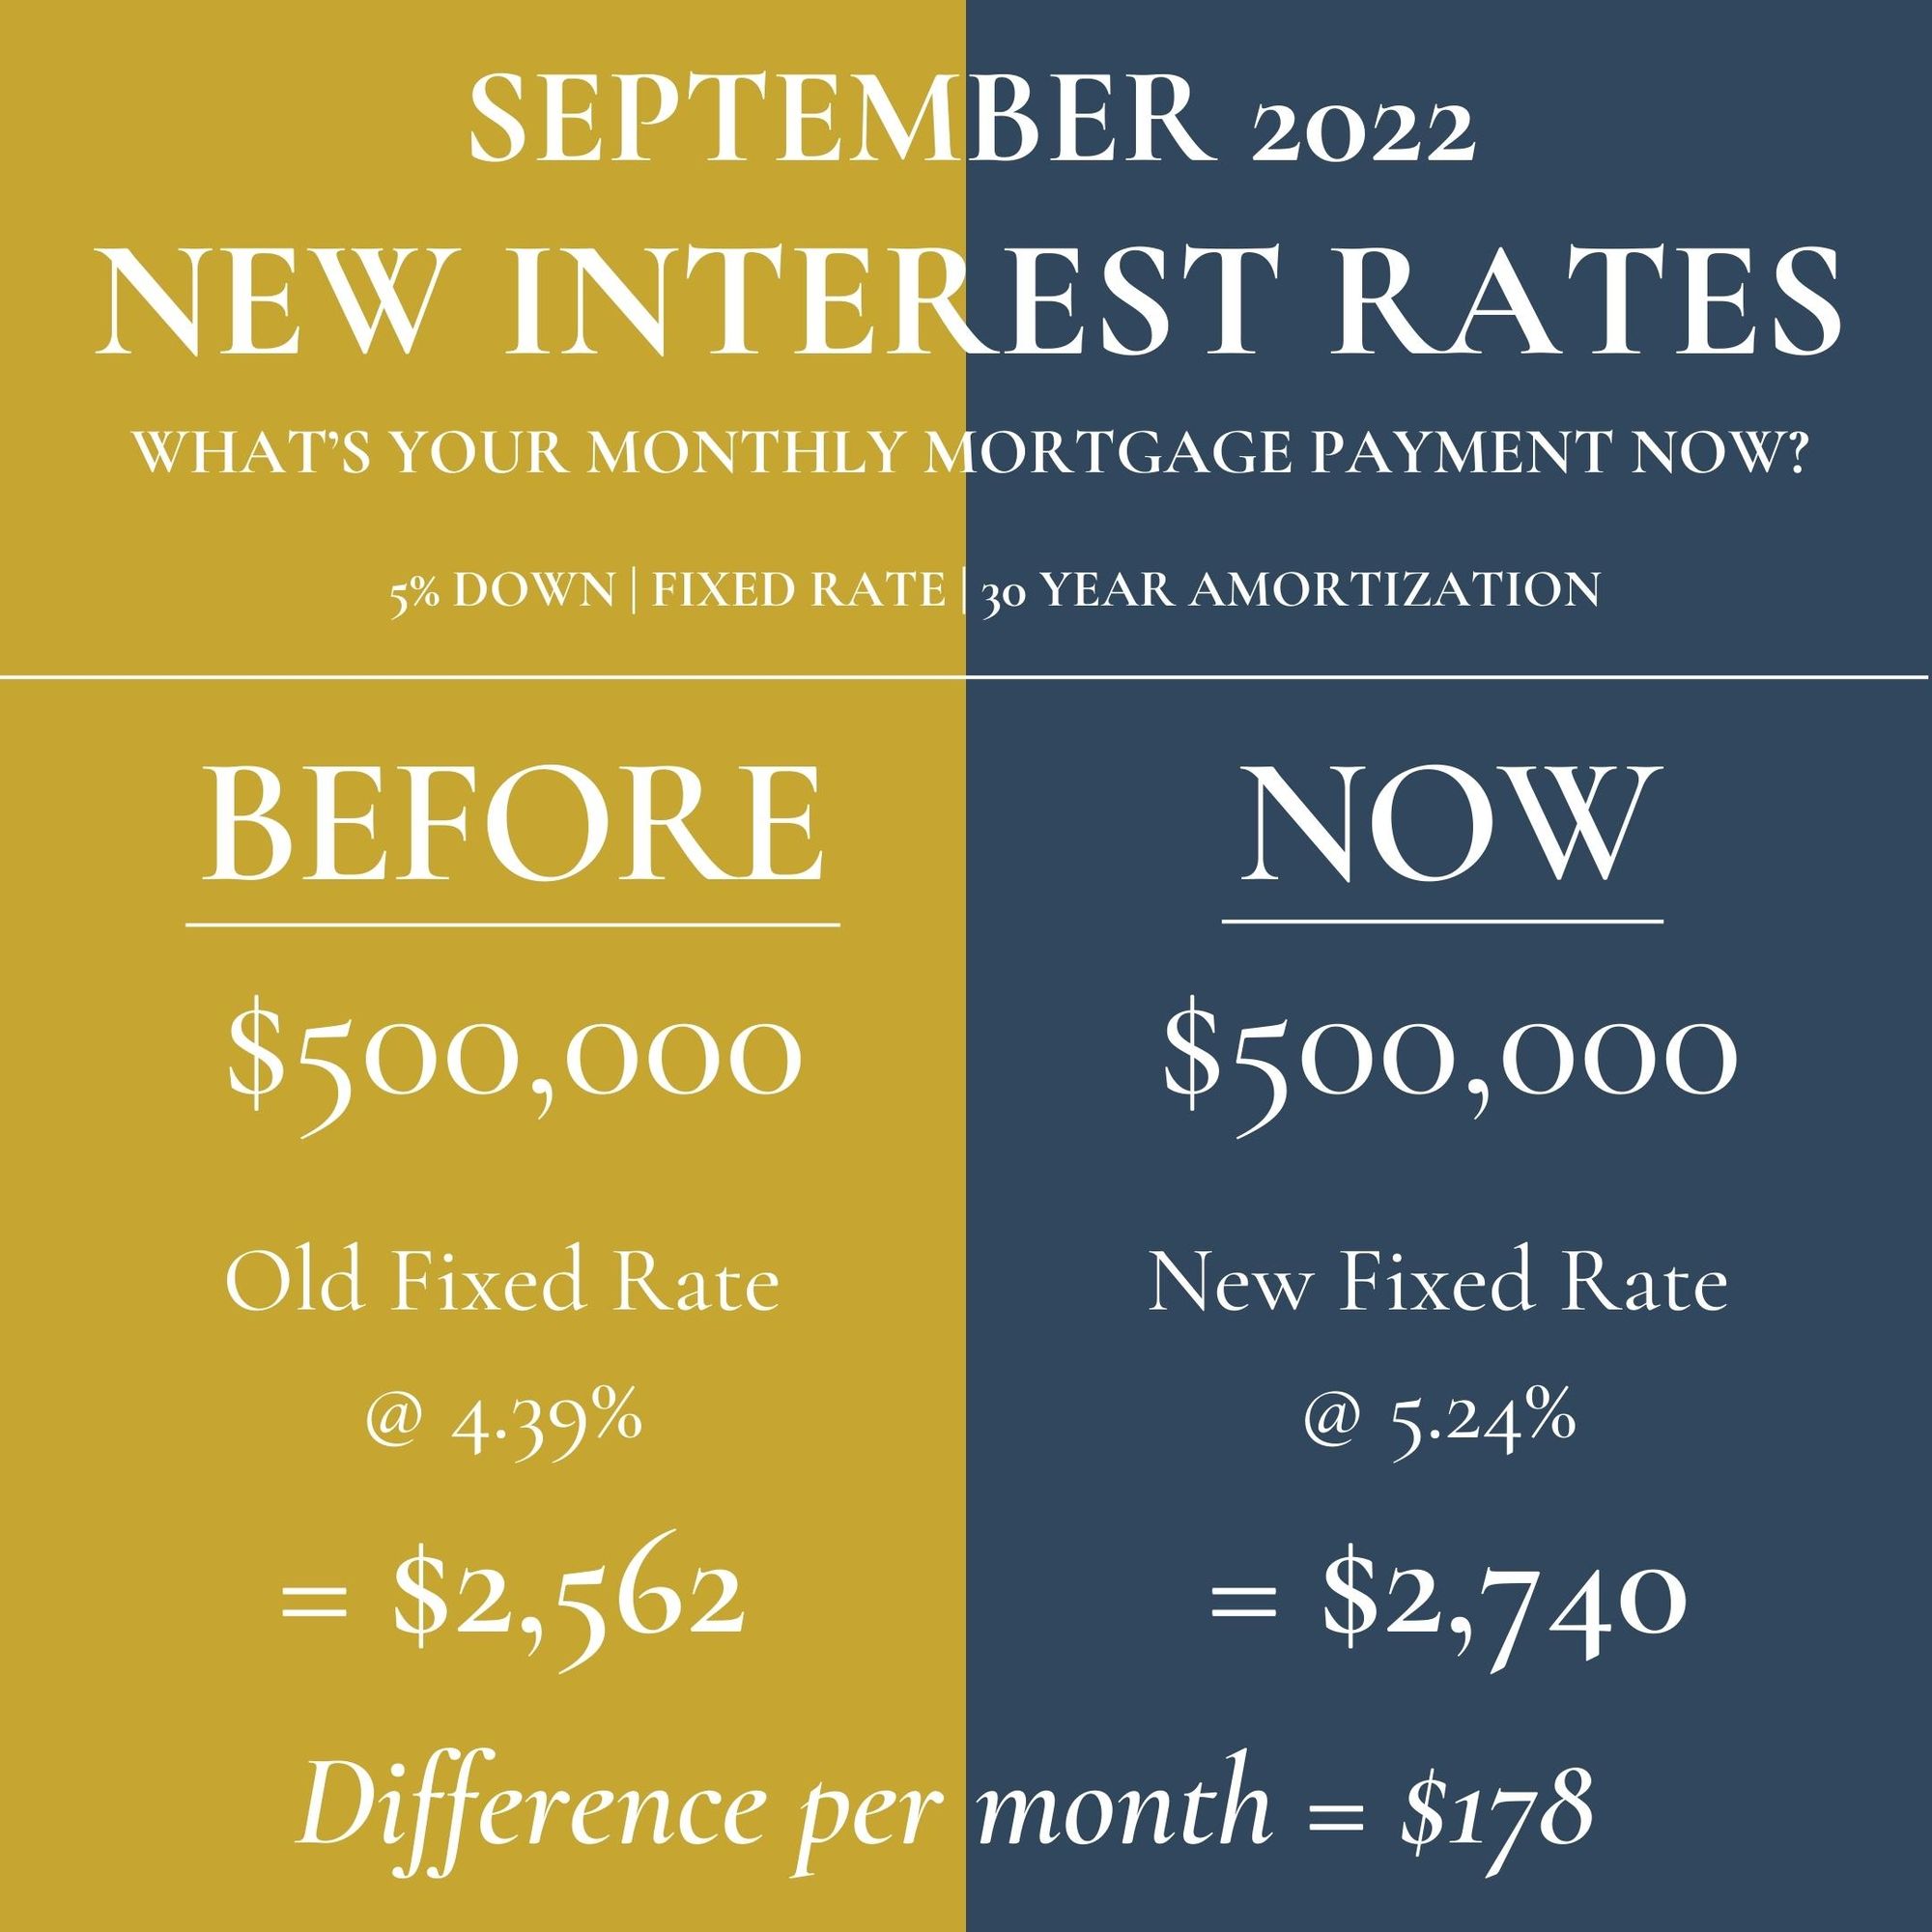 New Interest rates | What’s your monthly mortgage payment now? | September 2022